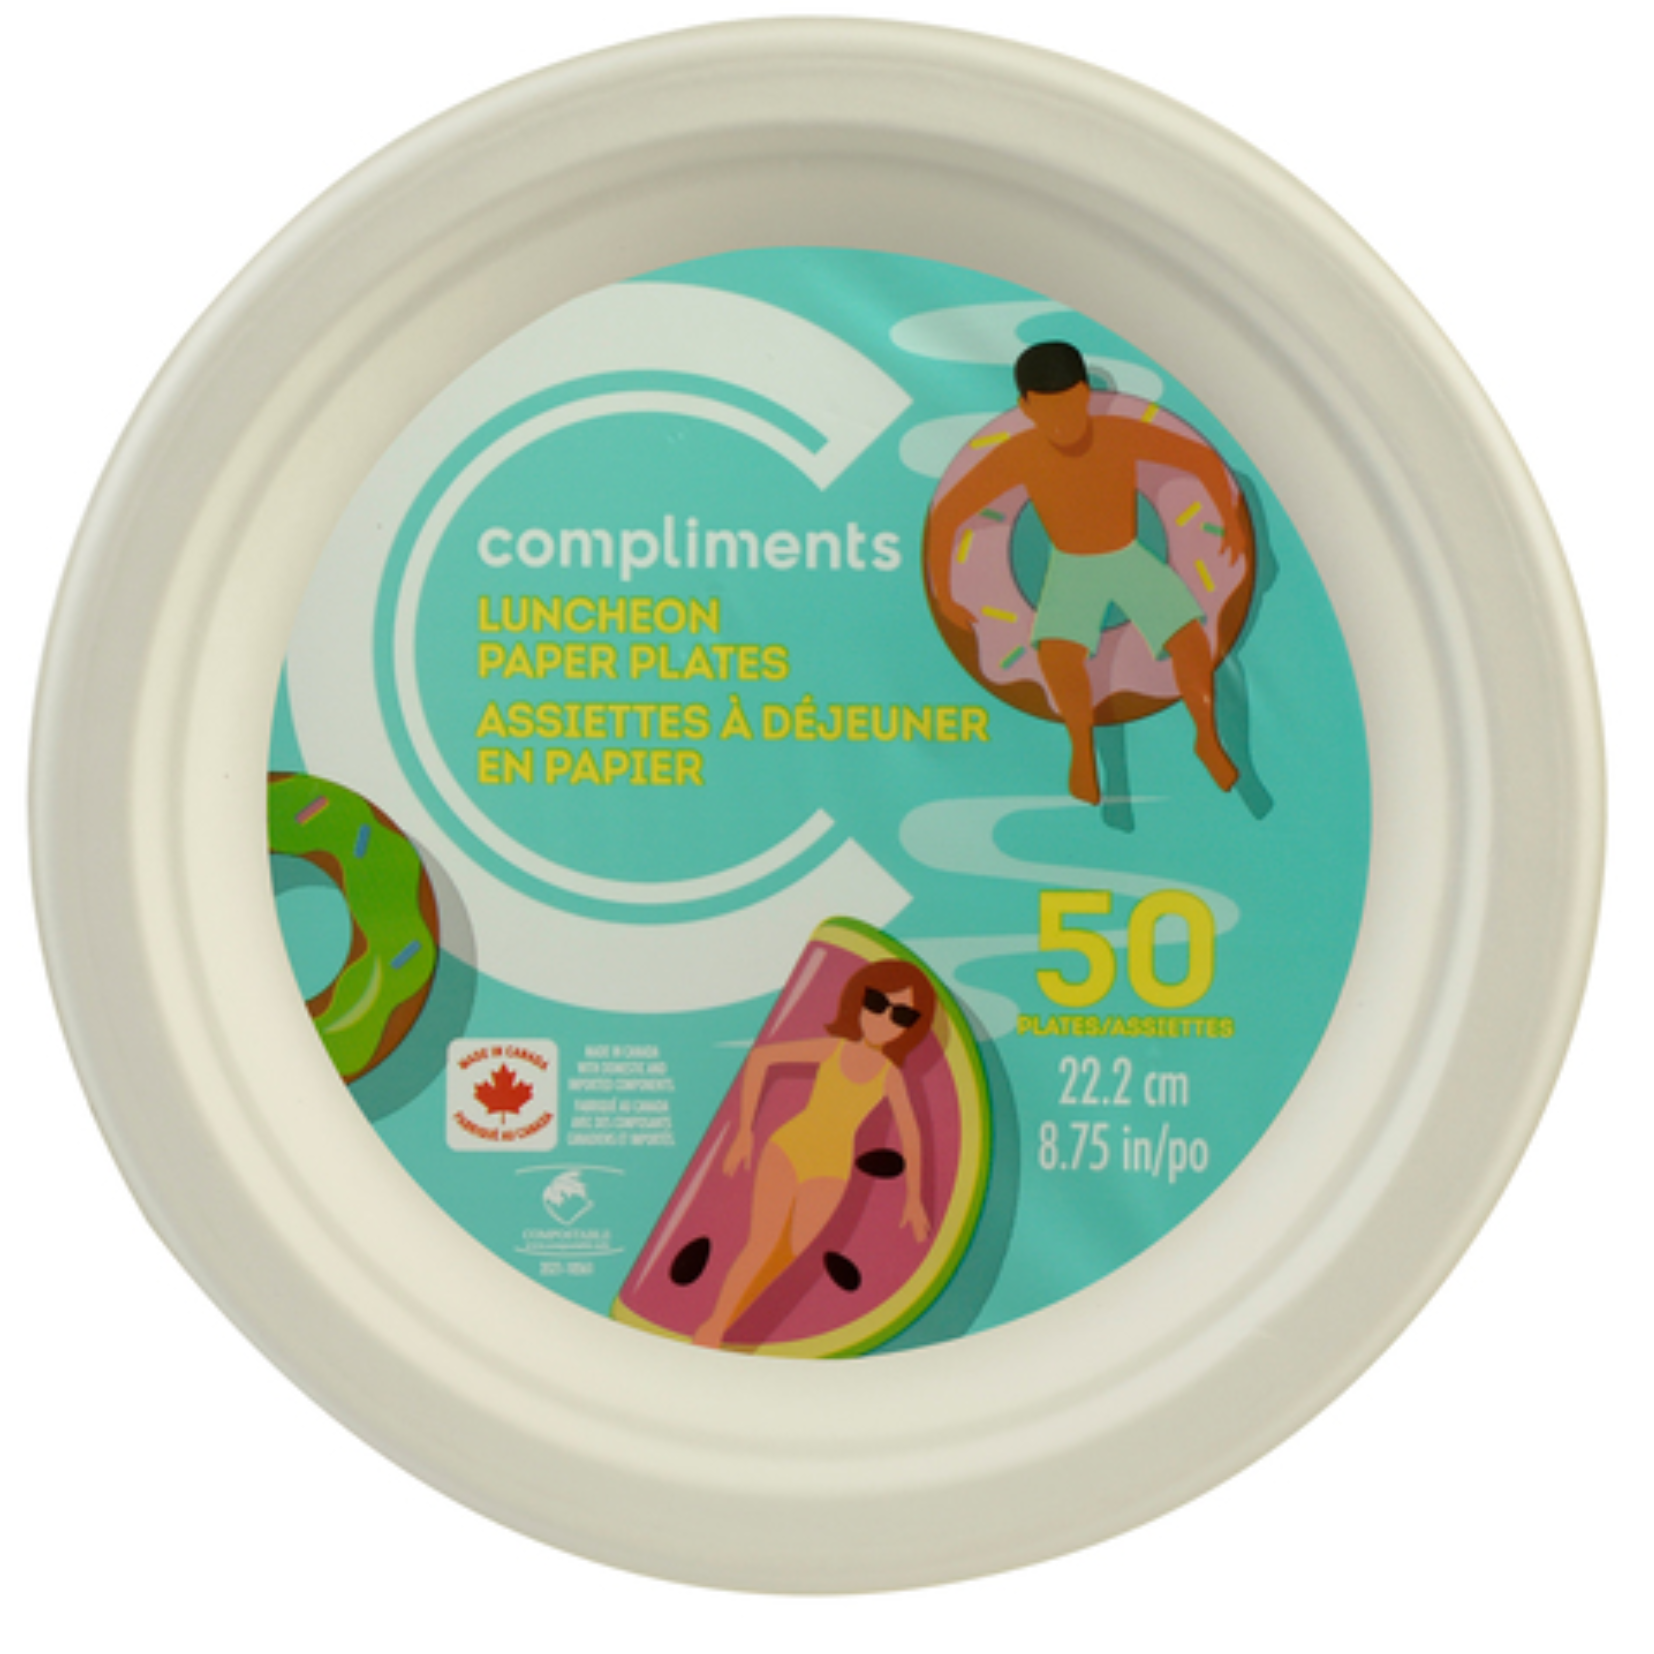 Compliments Paper Lunch Plates 8.75" 50ct